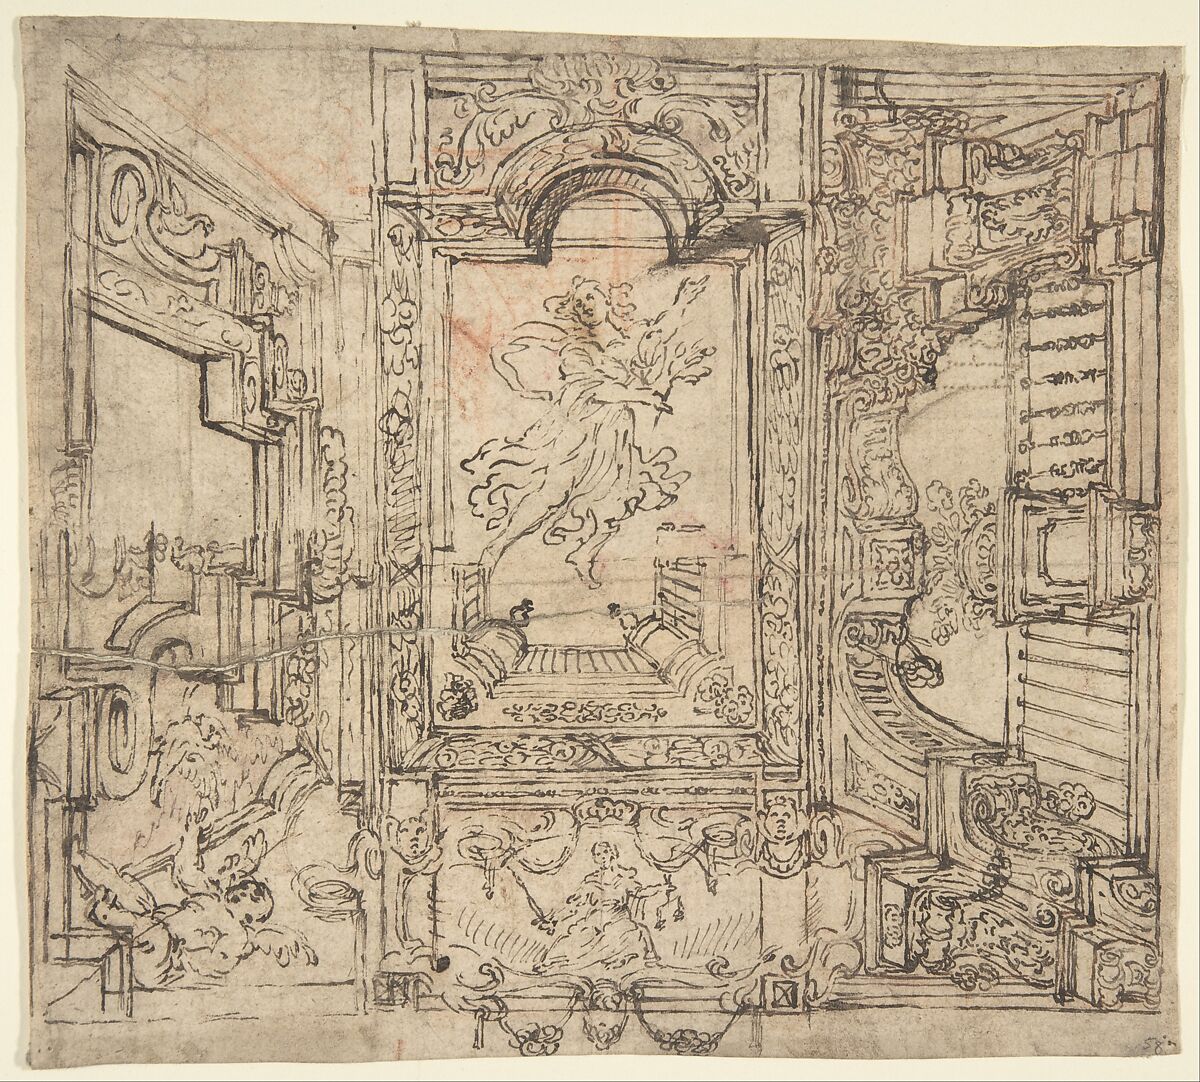 Design for a Painted Ceiling: Perspective Architectural with a Figure at the Center, Anonymous, Italian, Piedmontese, 18th century, Pen and brown ink and red chalk (recto). Pricked for transfer in right part of sheet and at all corners. Pen and brown ink sketches (verso) 